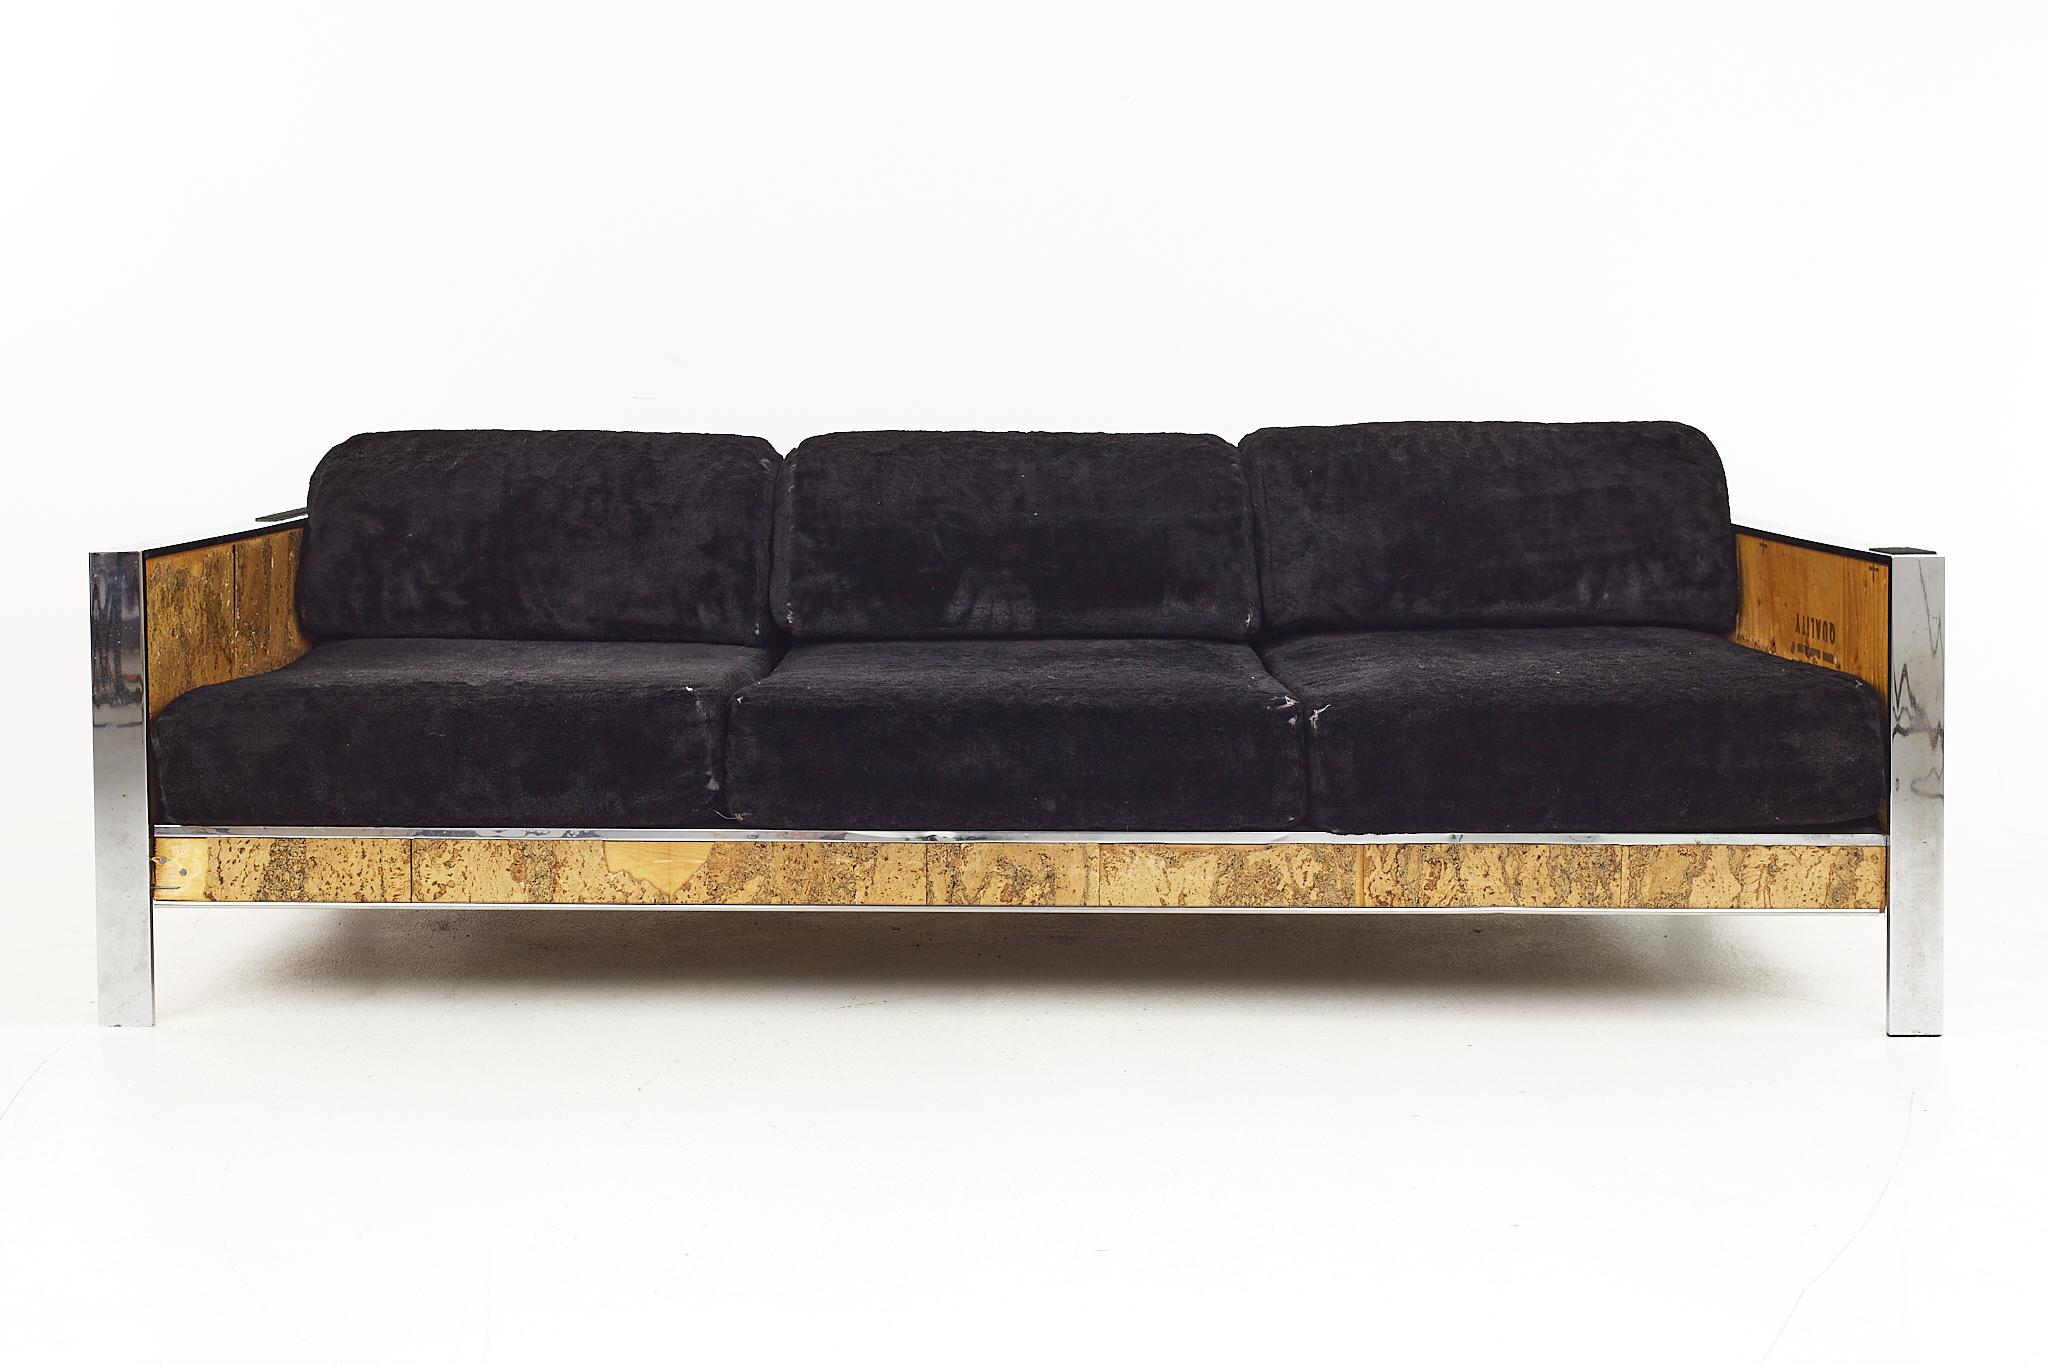 Adrian Pearsall for Craft Associates Mid Century Cork and Chrome Sofa

The sofa measures: 84.5 wide x 35.5 deep x 27.5 high, with a seat height of 16 inches and arm height of 22 inches 

Ready for new upholstery. This service is available for an